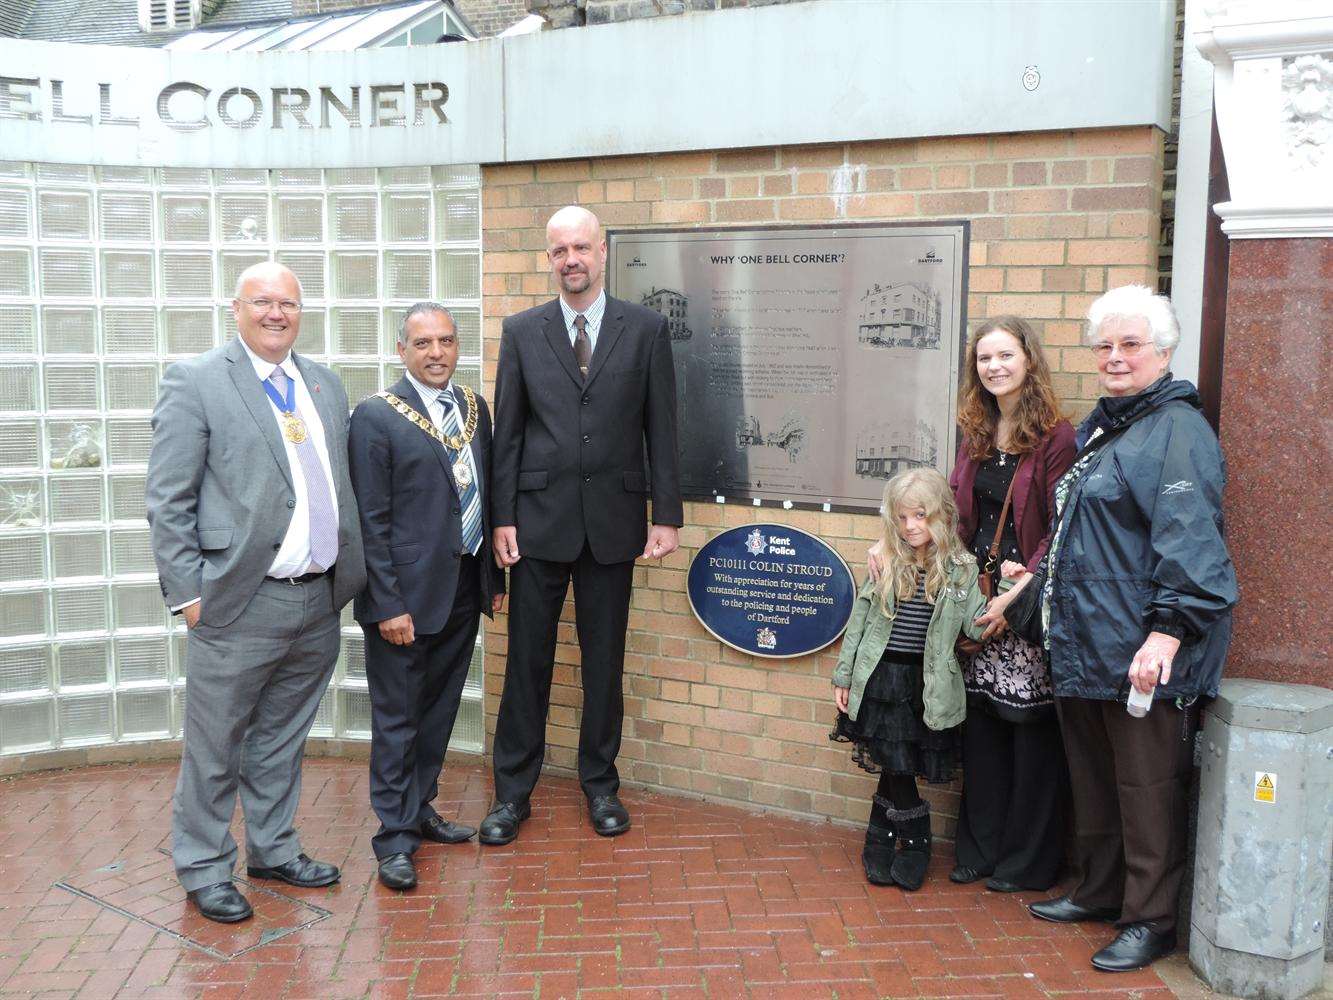 Dartford council leader Jeremy Kite, Mayor Cllr Avtar Sandhu, Colin Stroud, his daughter Summer, wife Jenny and mother Valerie Stroud.